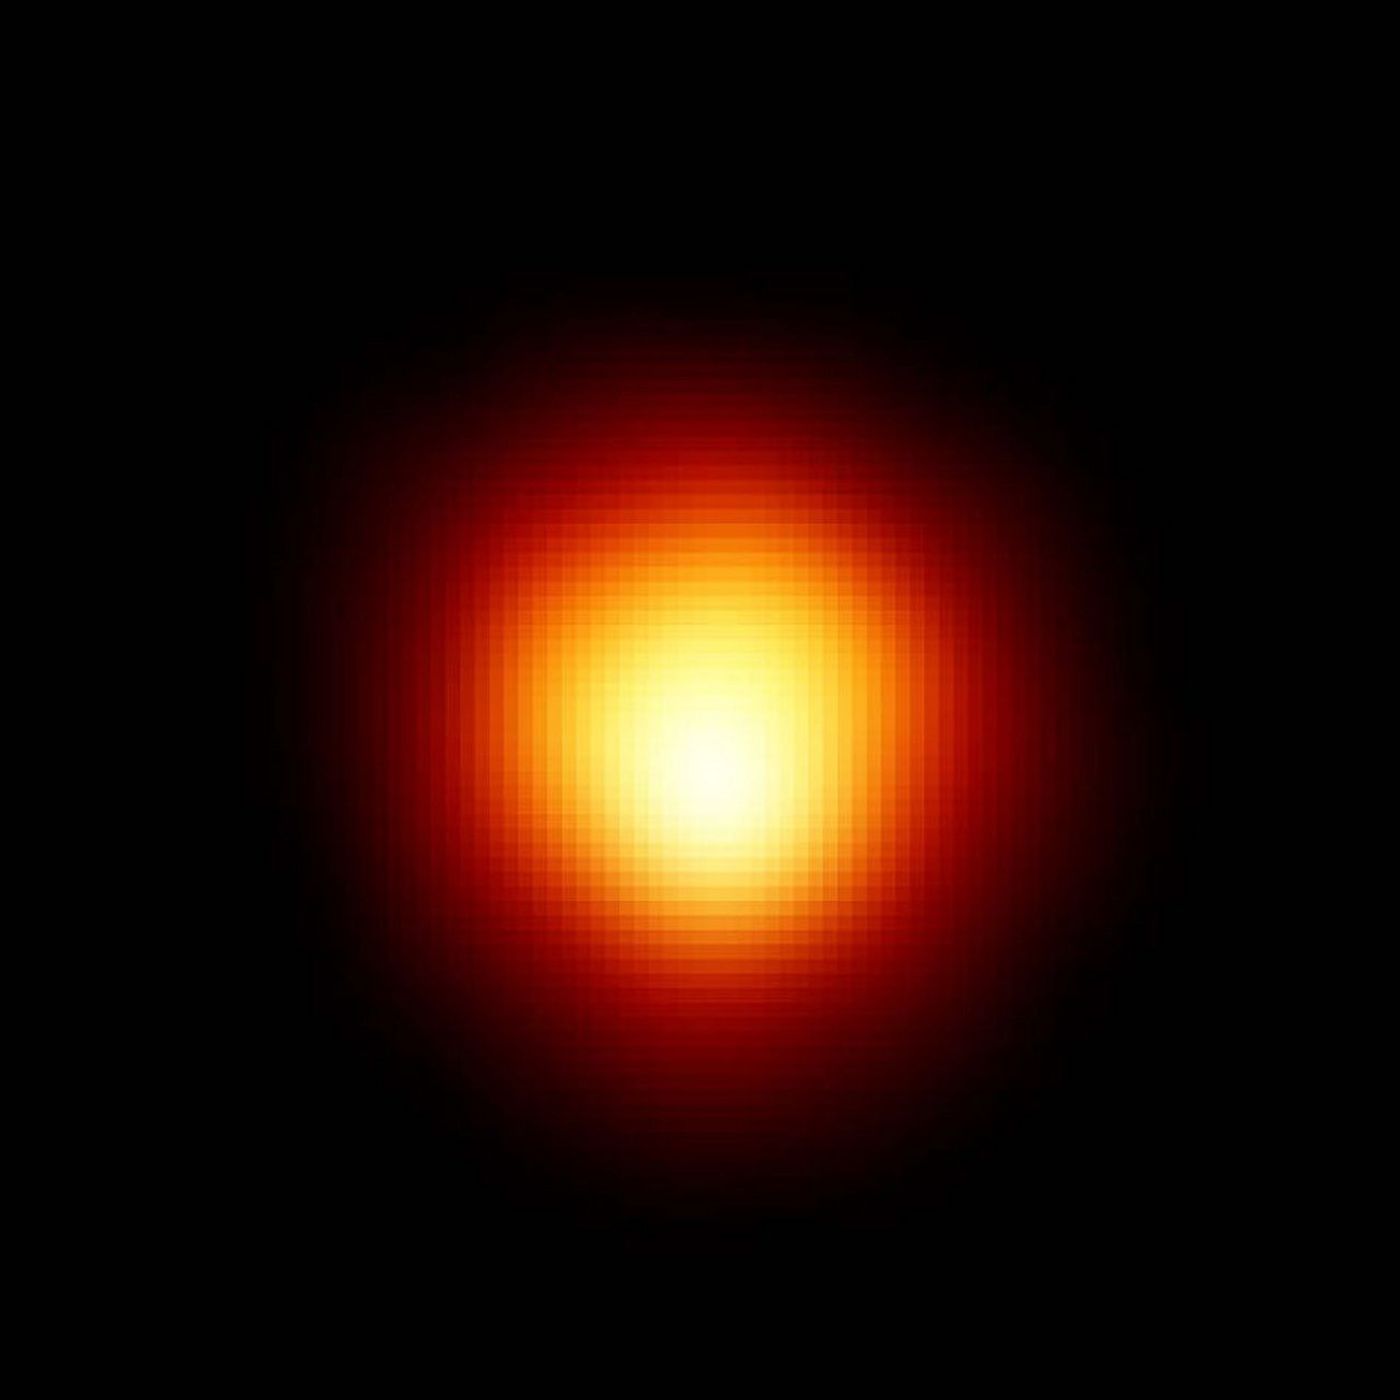 An image of Betelgeuse captured with a space telescope.